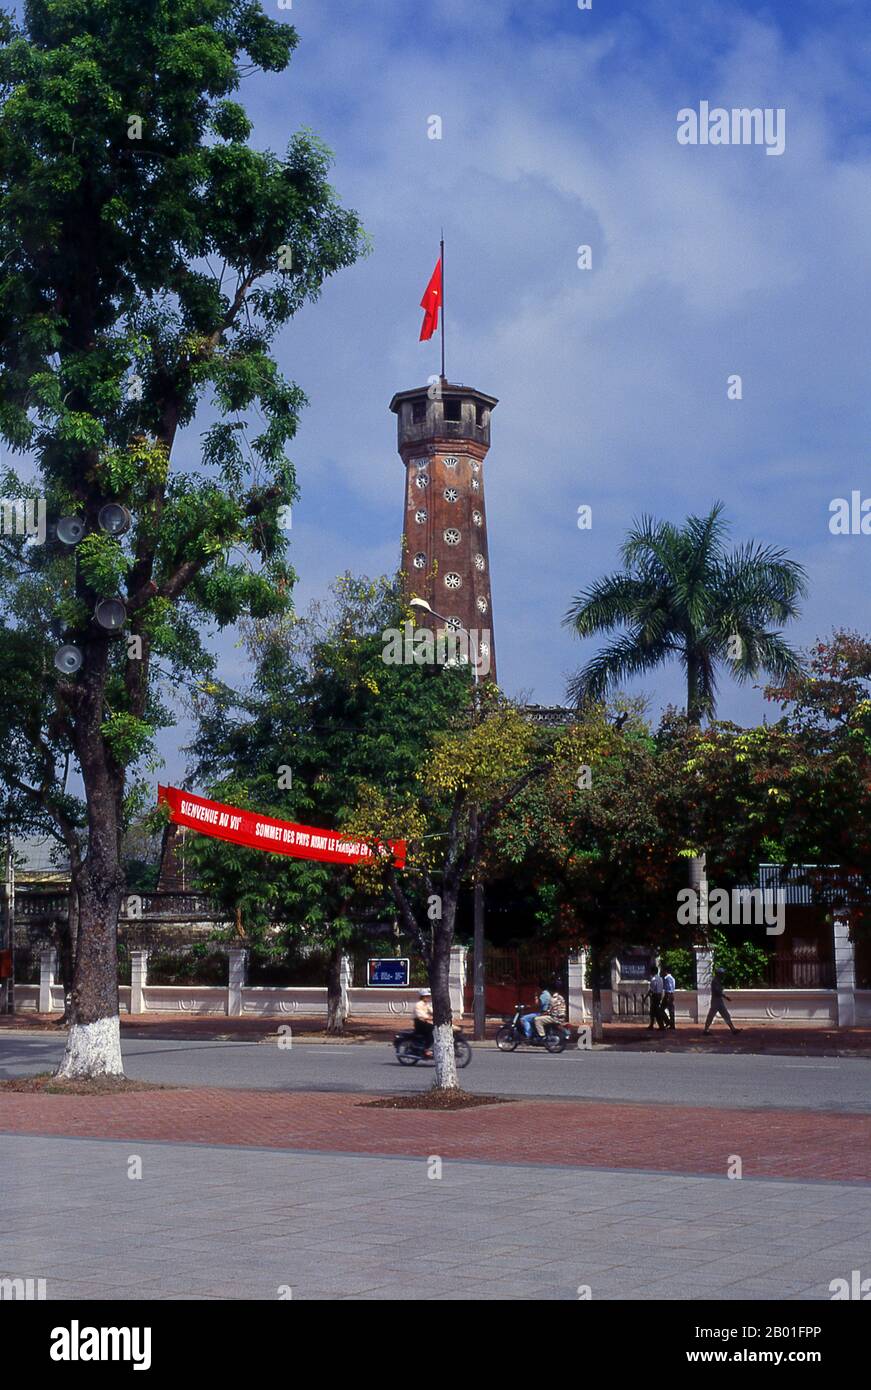 Vietnam: Cot Co, or the Flag Tower, in the grounds of the Military History Museum, Hanoi.  The hexagonal Cot Co Flag Tower was rebuilt by Emperor Gia Long of the Nguyen Dynasty in 1803 as a symbol of Nguyen power in the north. The tower is an important symbol of both Hanoi and the Vietnamese armed forces. Stock Photo